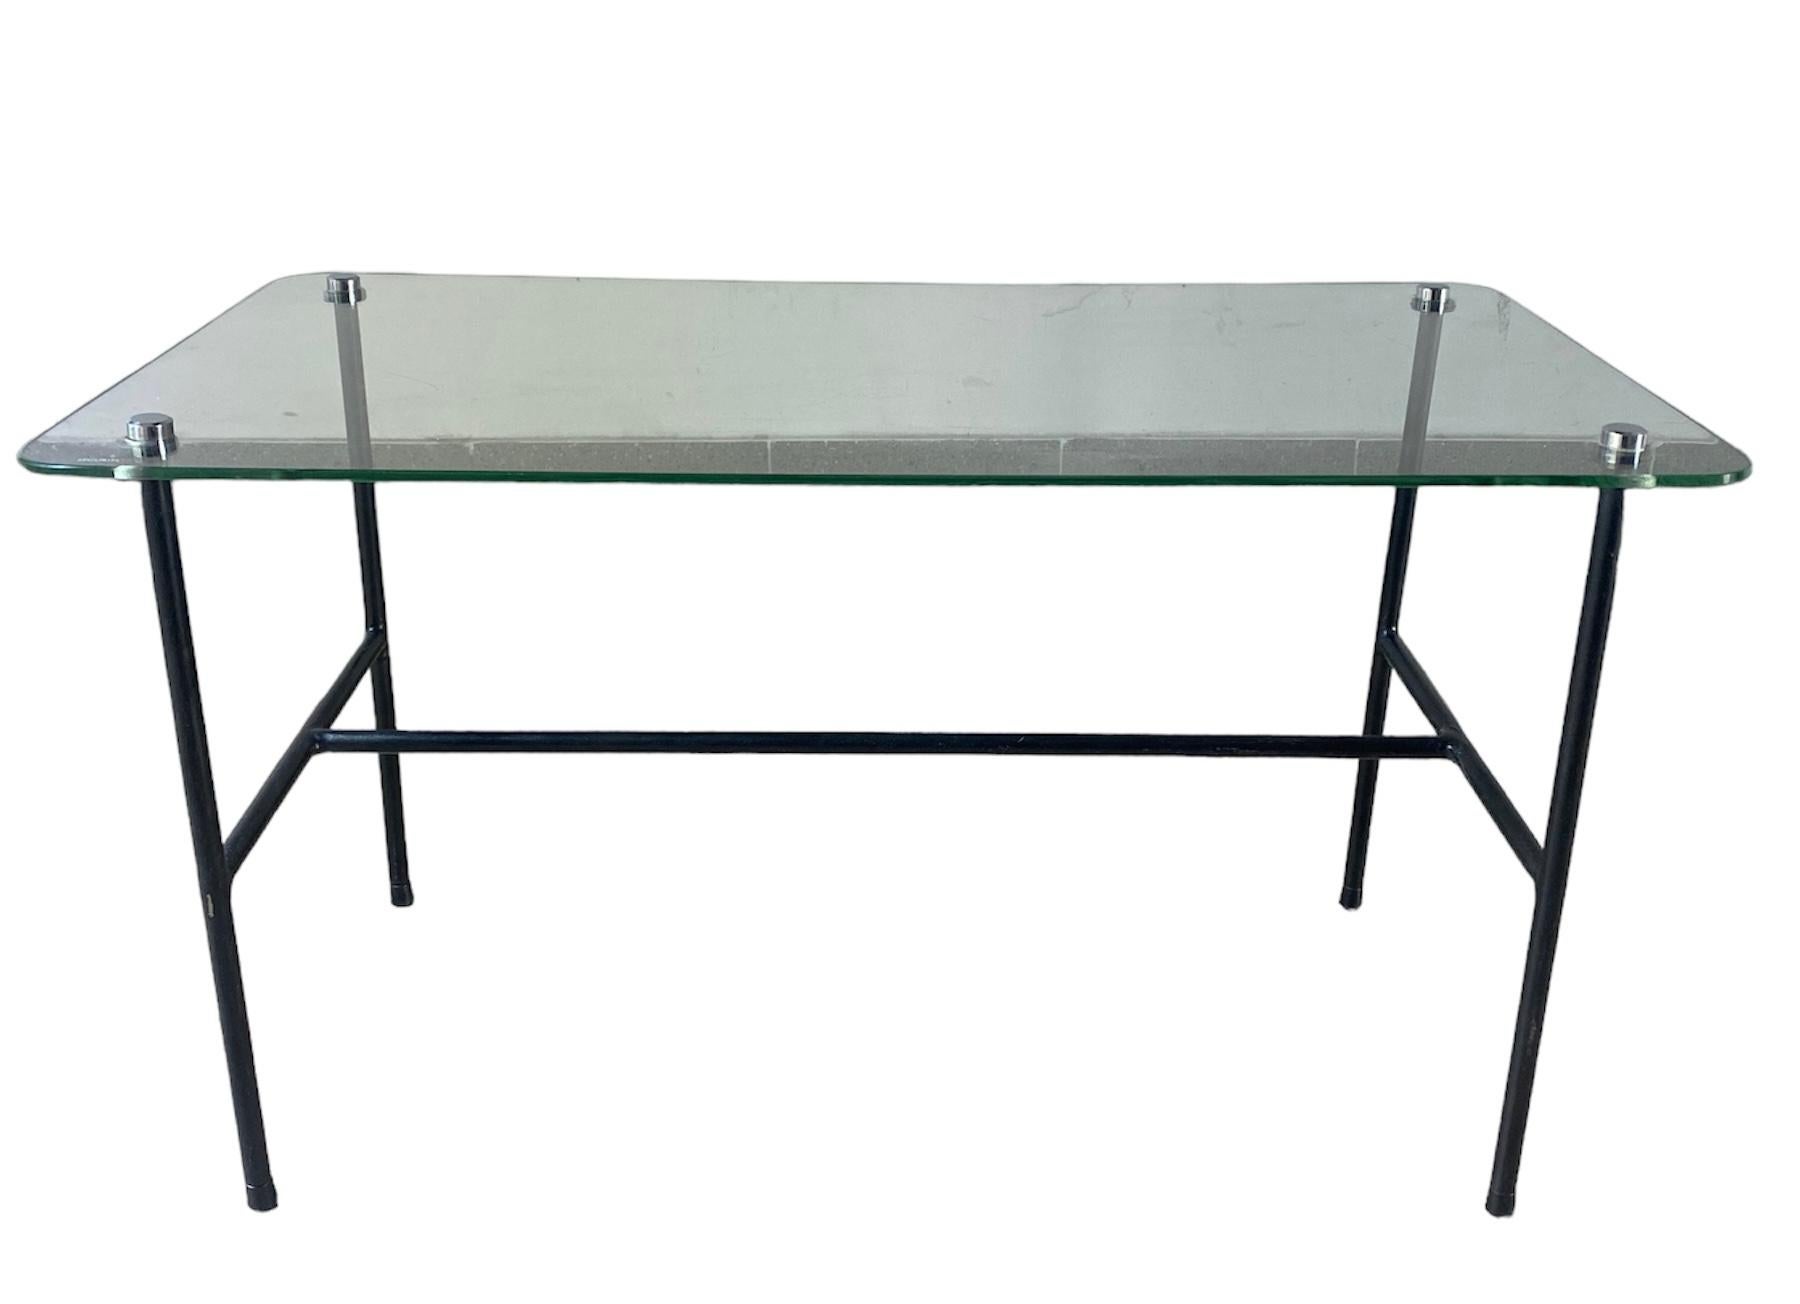 French Coffee Table Disderot Glass and Steel, Pierre Guariche, 1950 For Sale 6